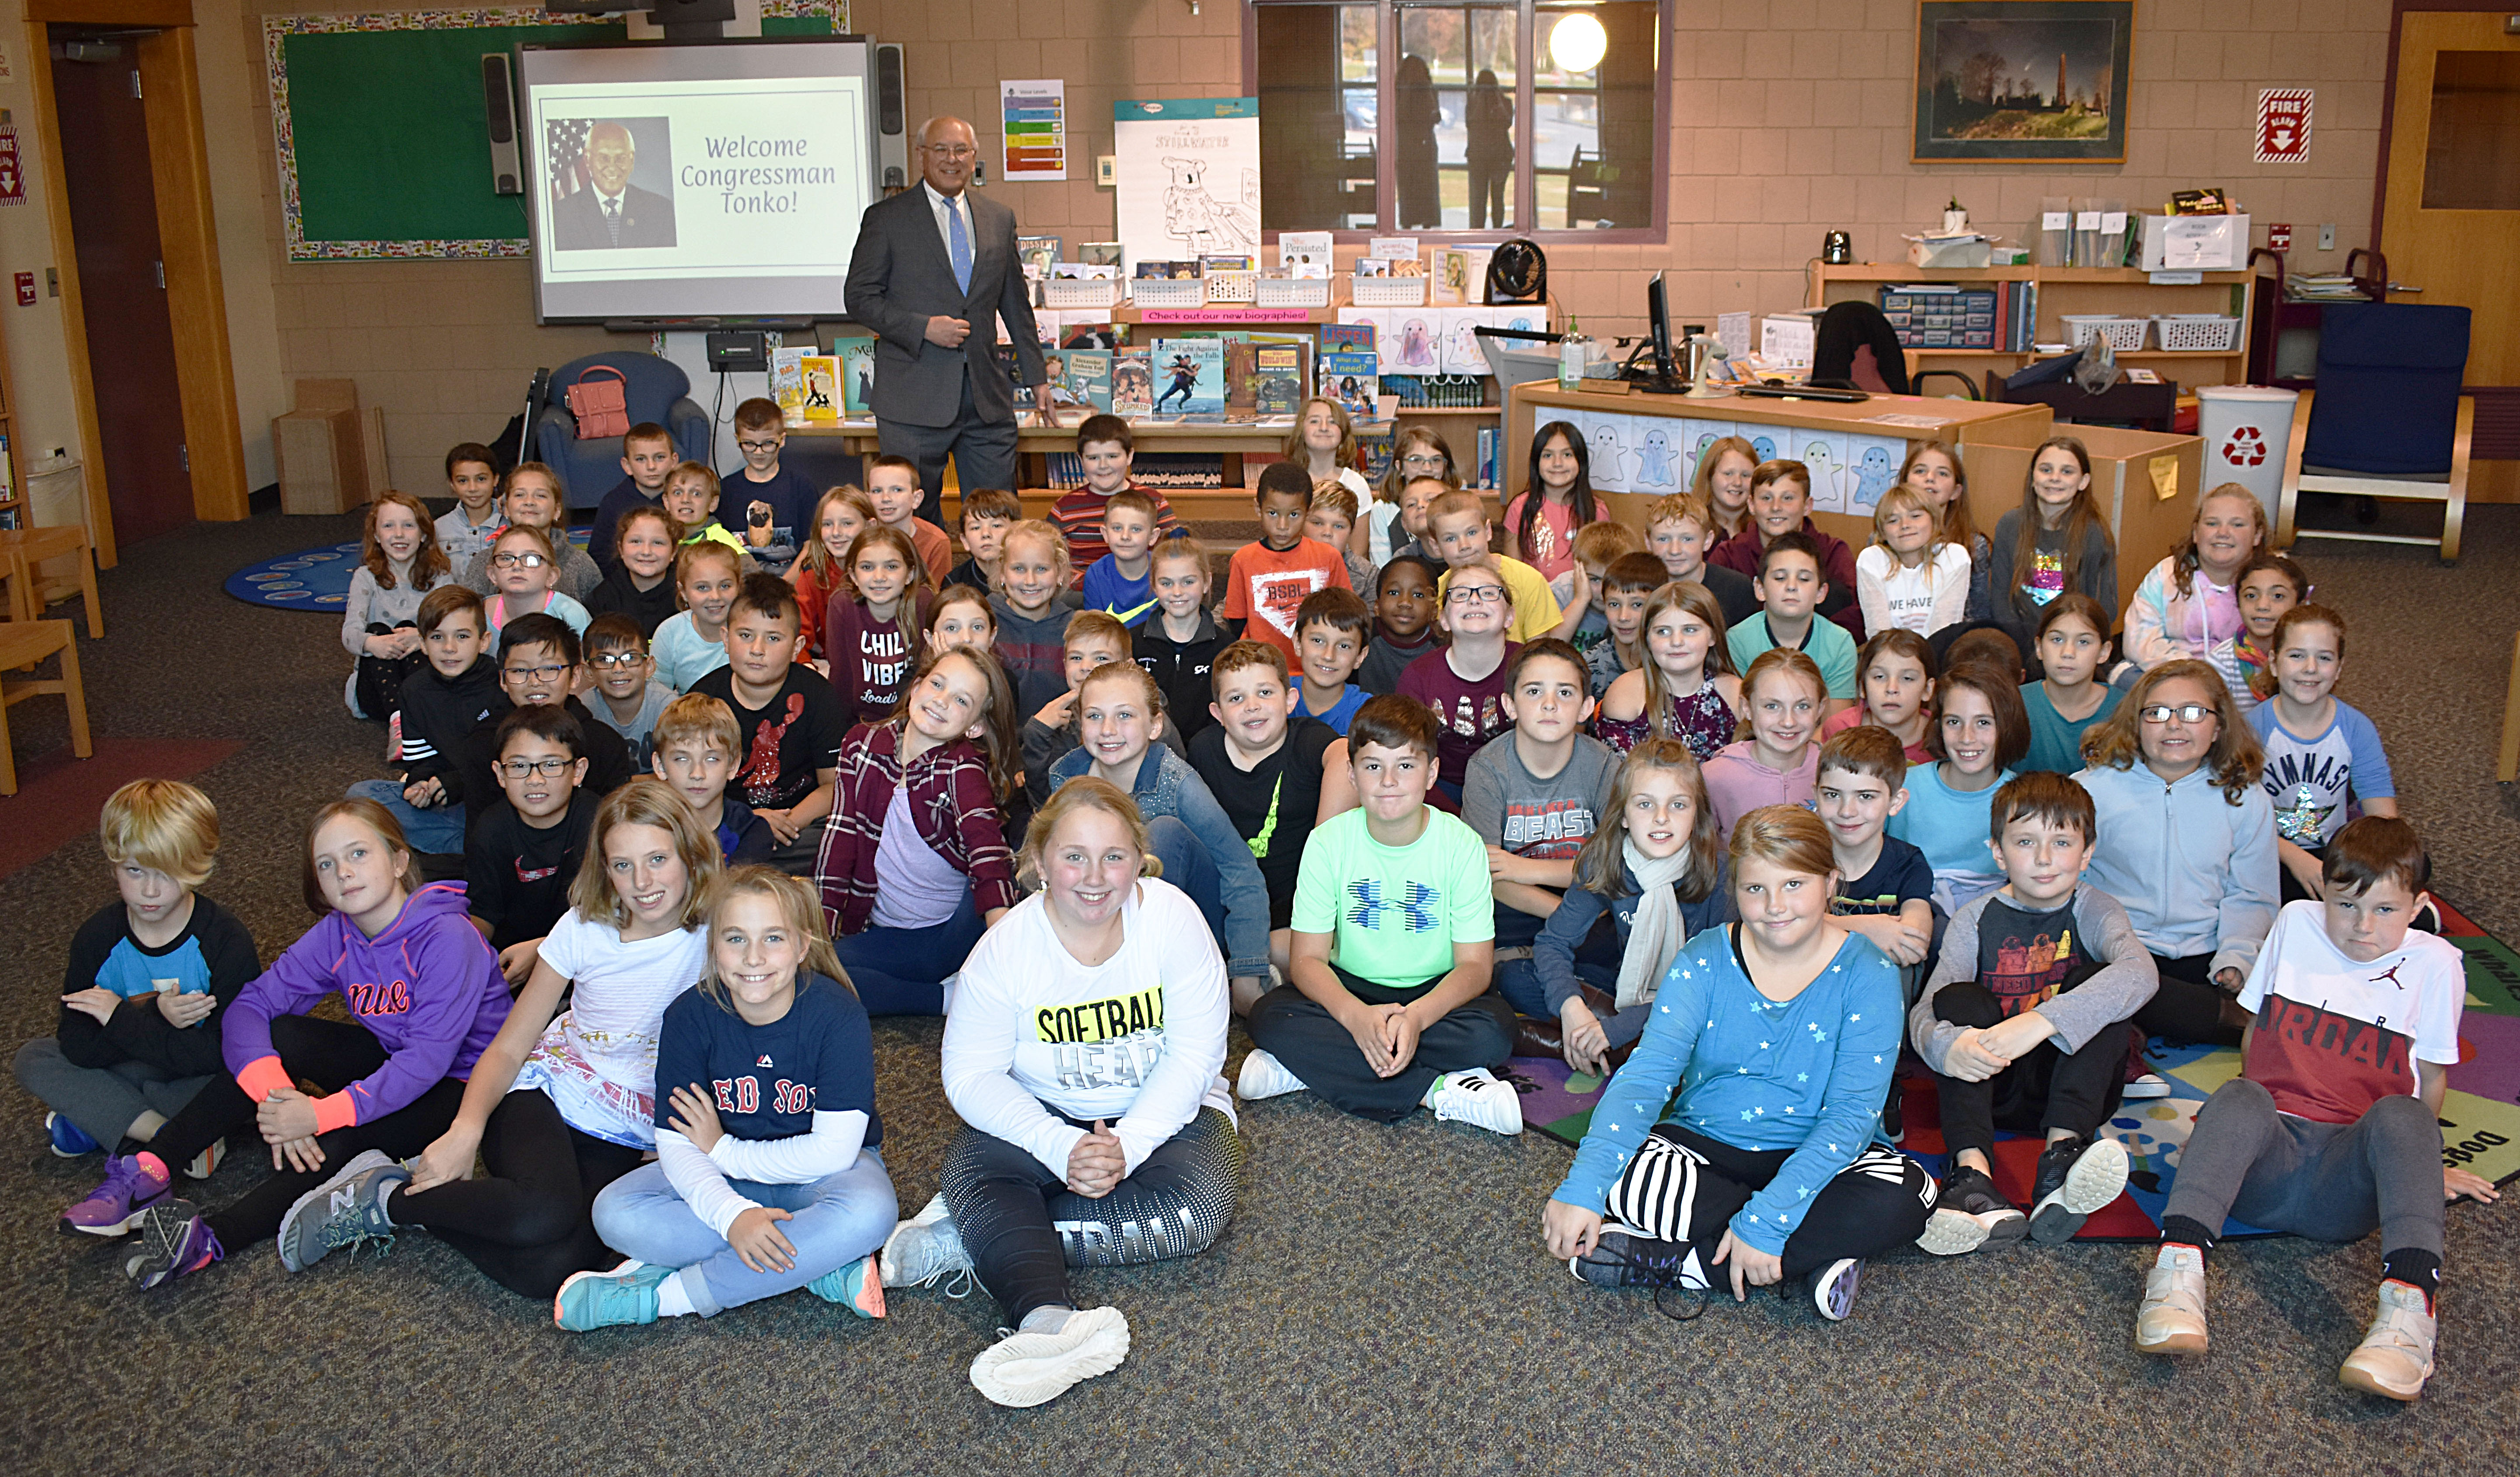 Congressman Paul Tonko stands behind fourth grade students sitting on the floor